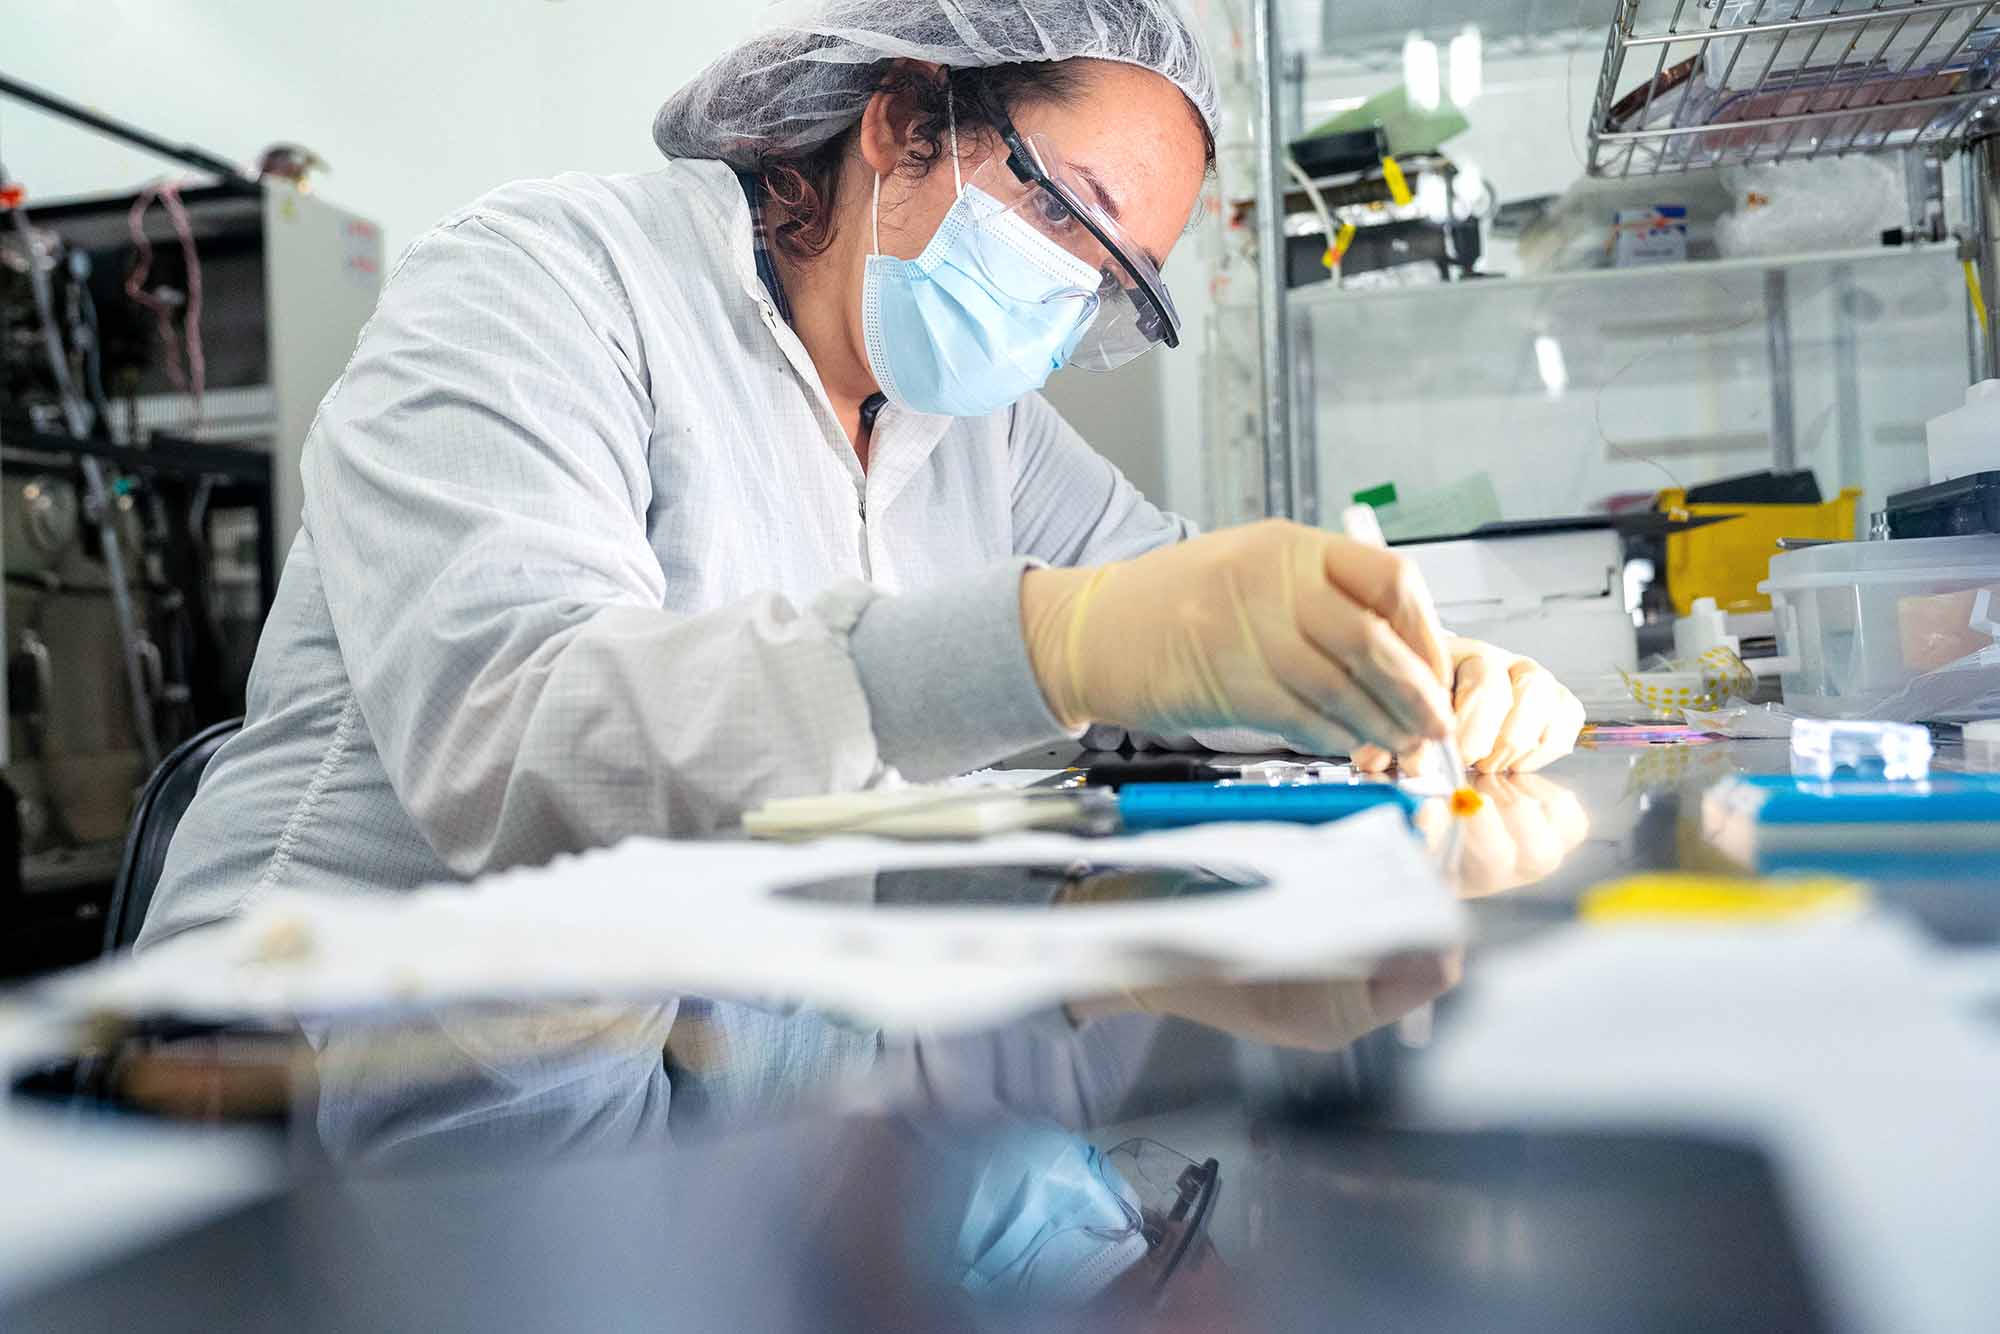 A researcher works with semiconductor materials at Arizona State University’s MacroTechnology Works in Tempe, Arizona.